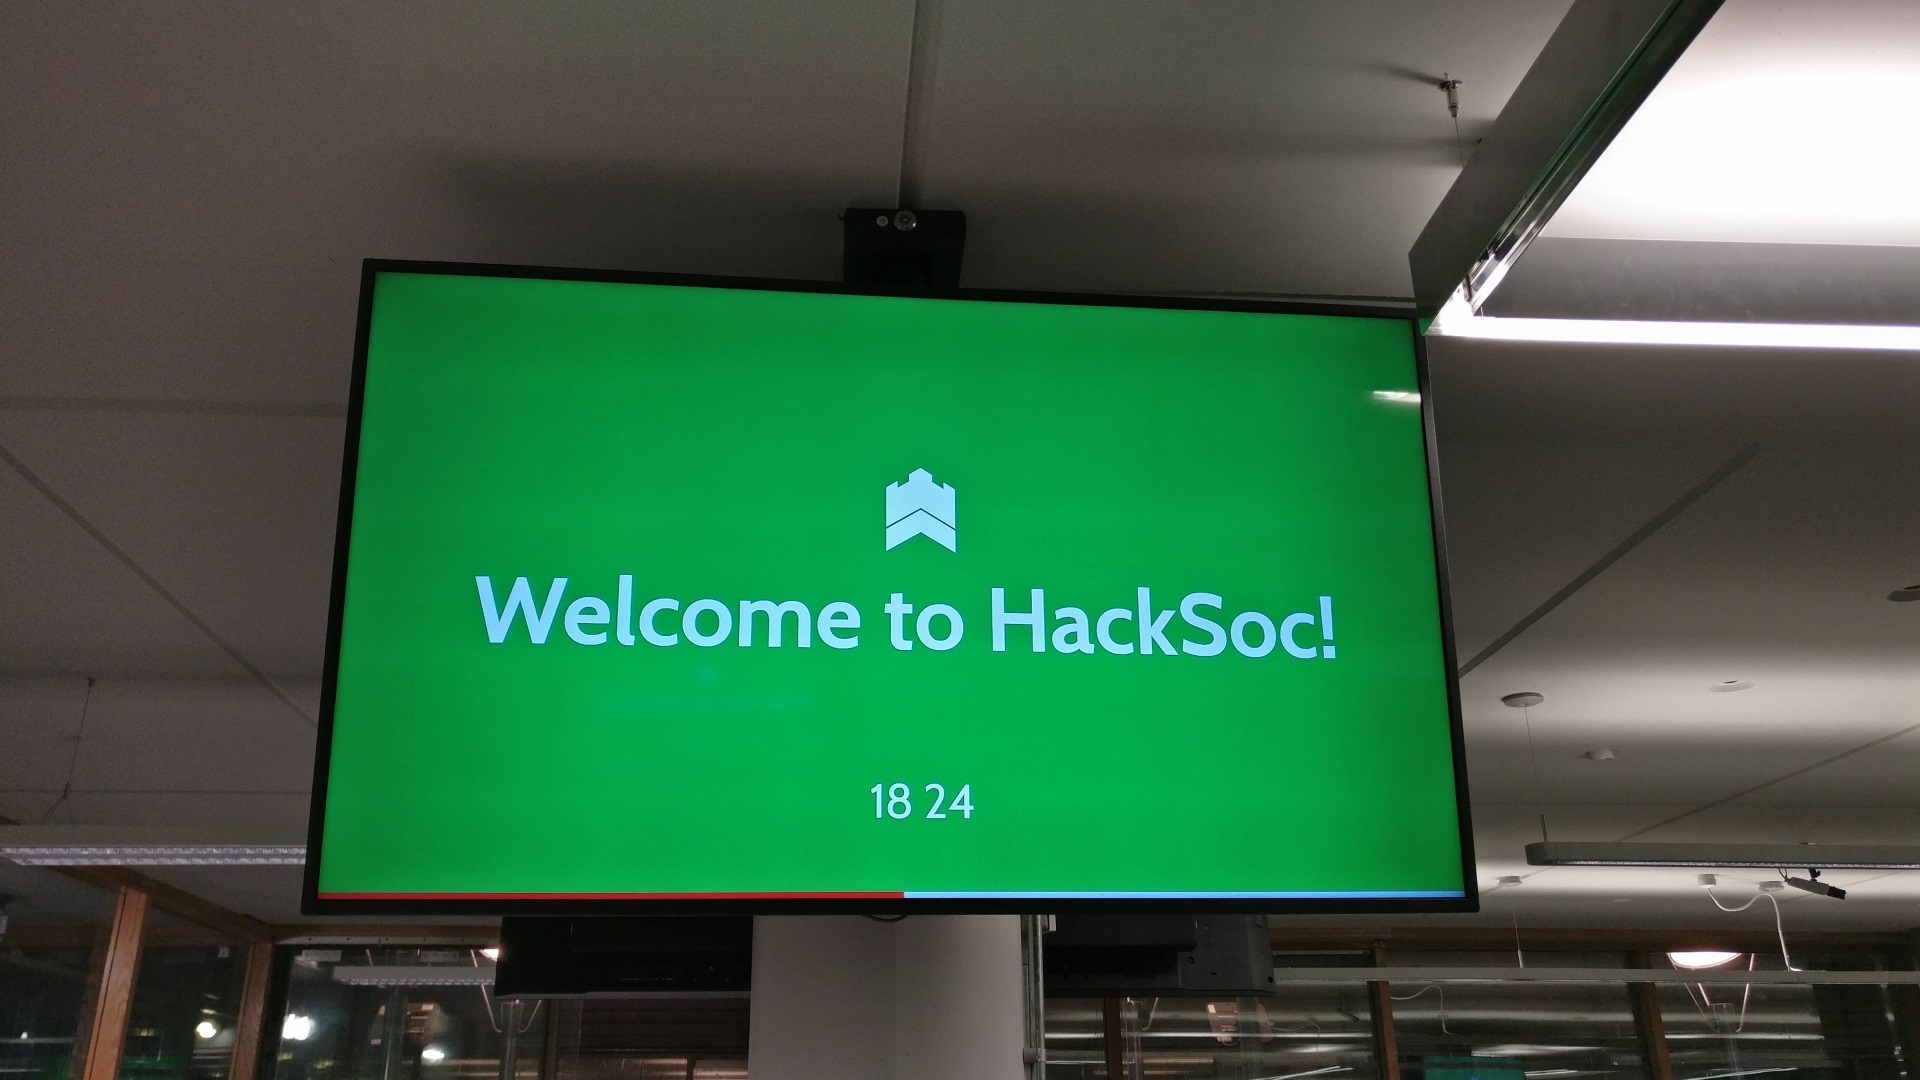 A television mounted on a pillar shows the text "Welcome to HackSoc!", with the time 18:24 visible in small text below it. The HackSoc logo is shown above the main text.